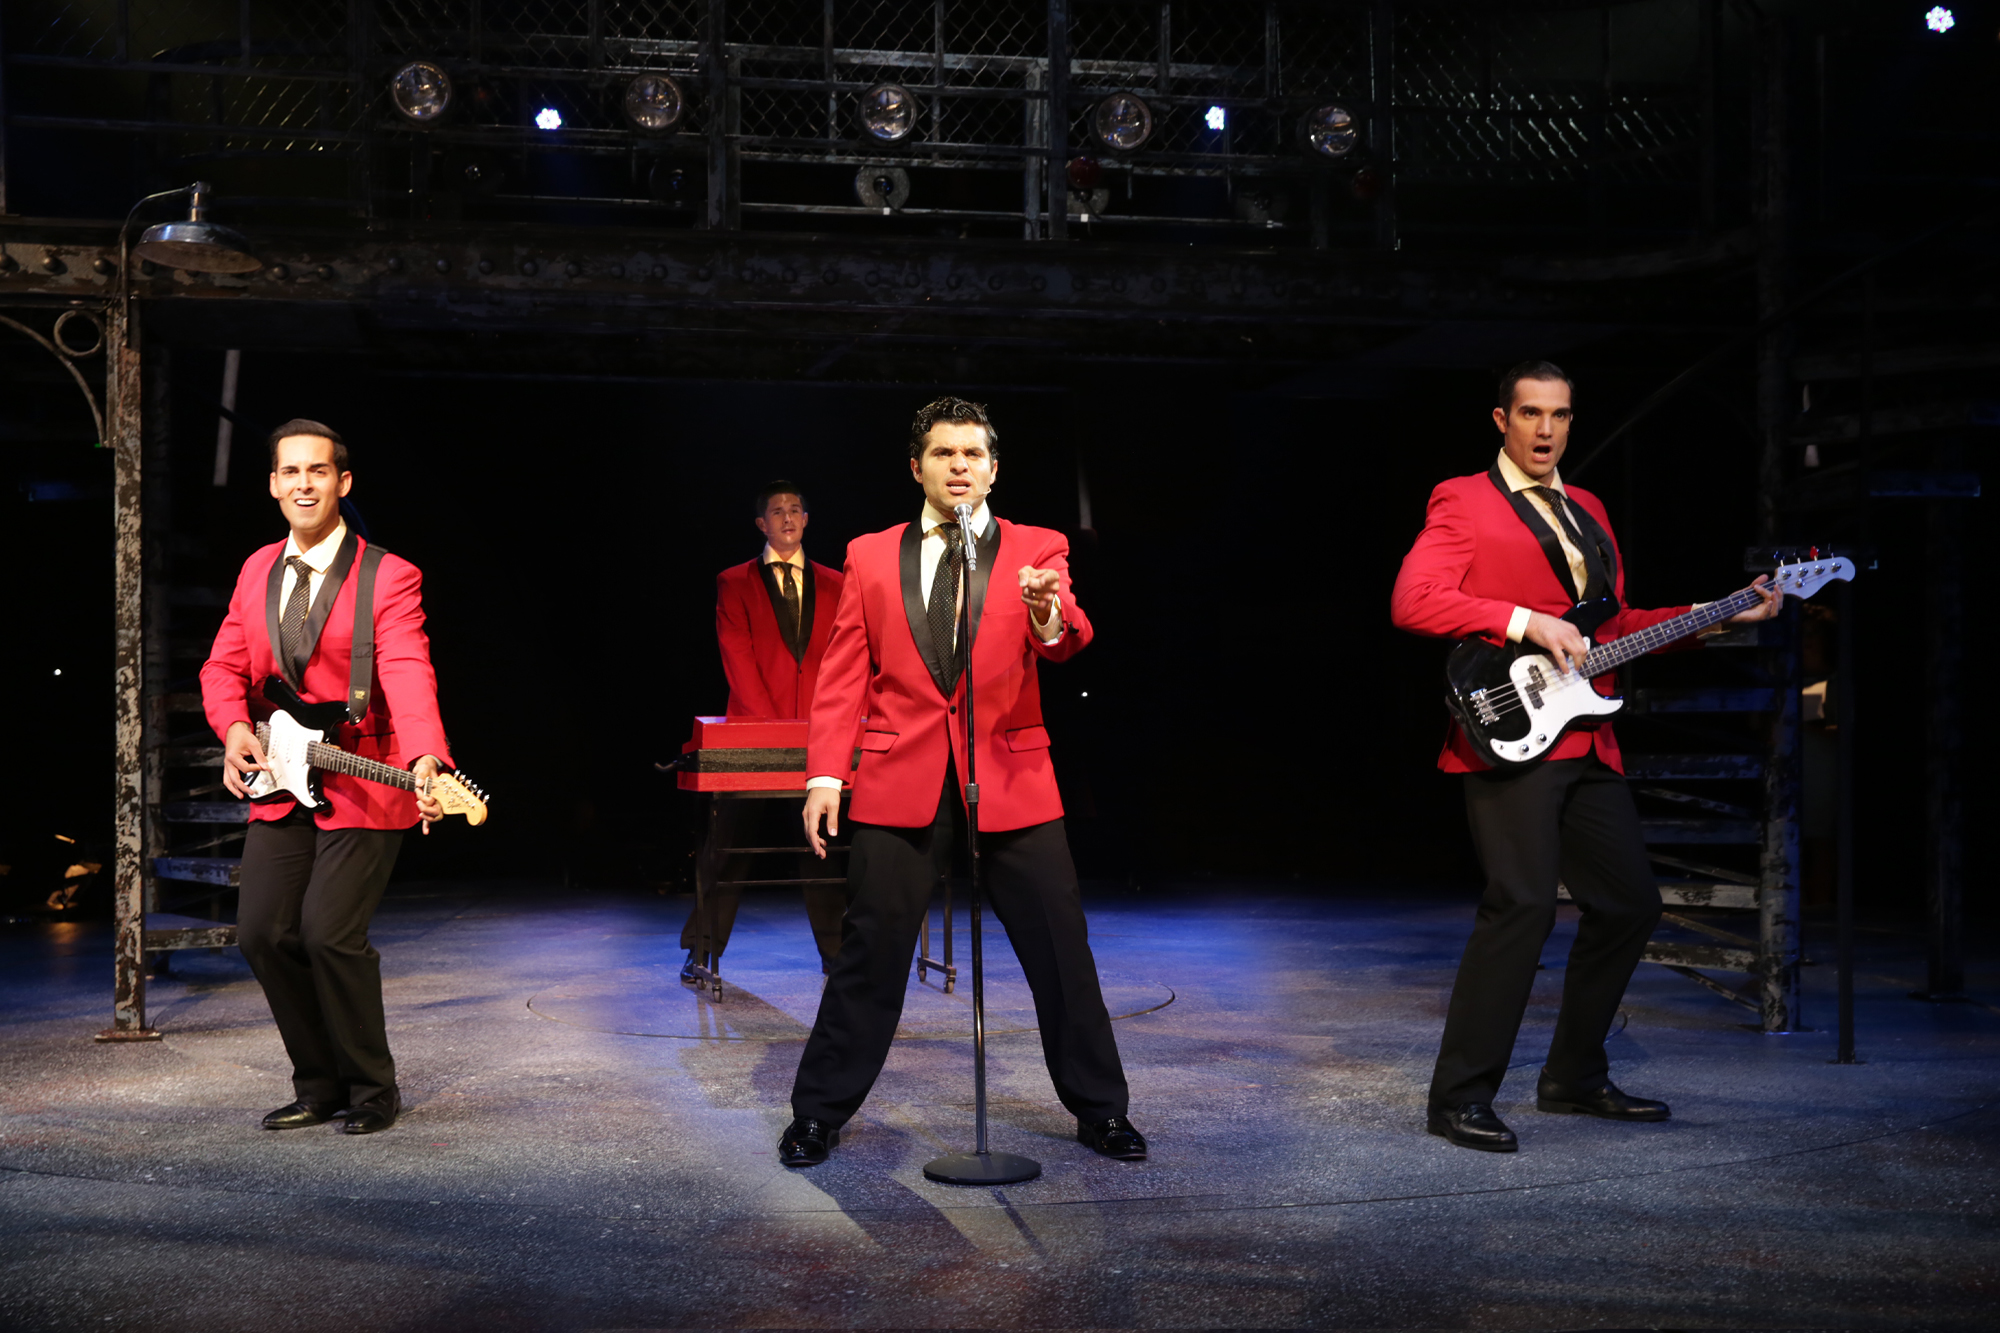 jersey boys 2 for 1 tickets